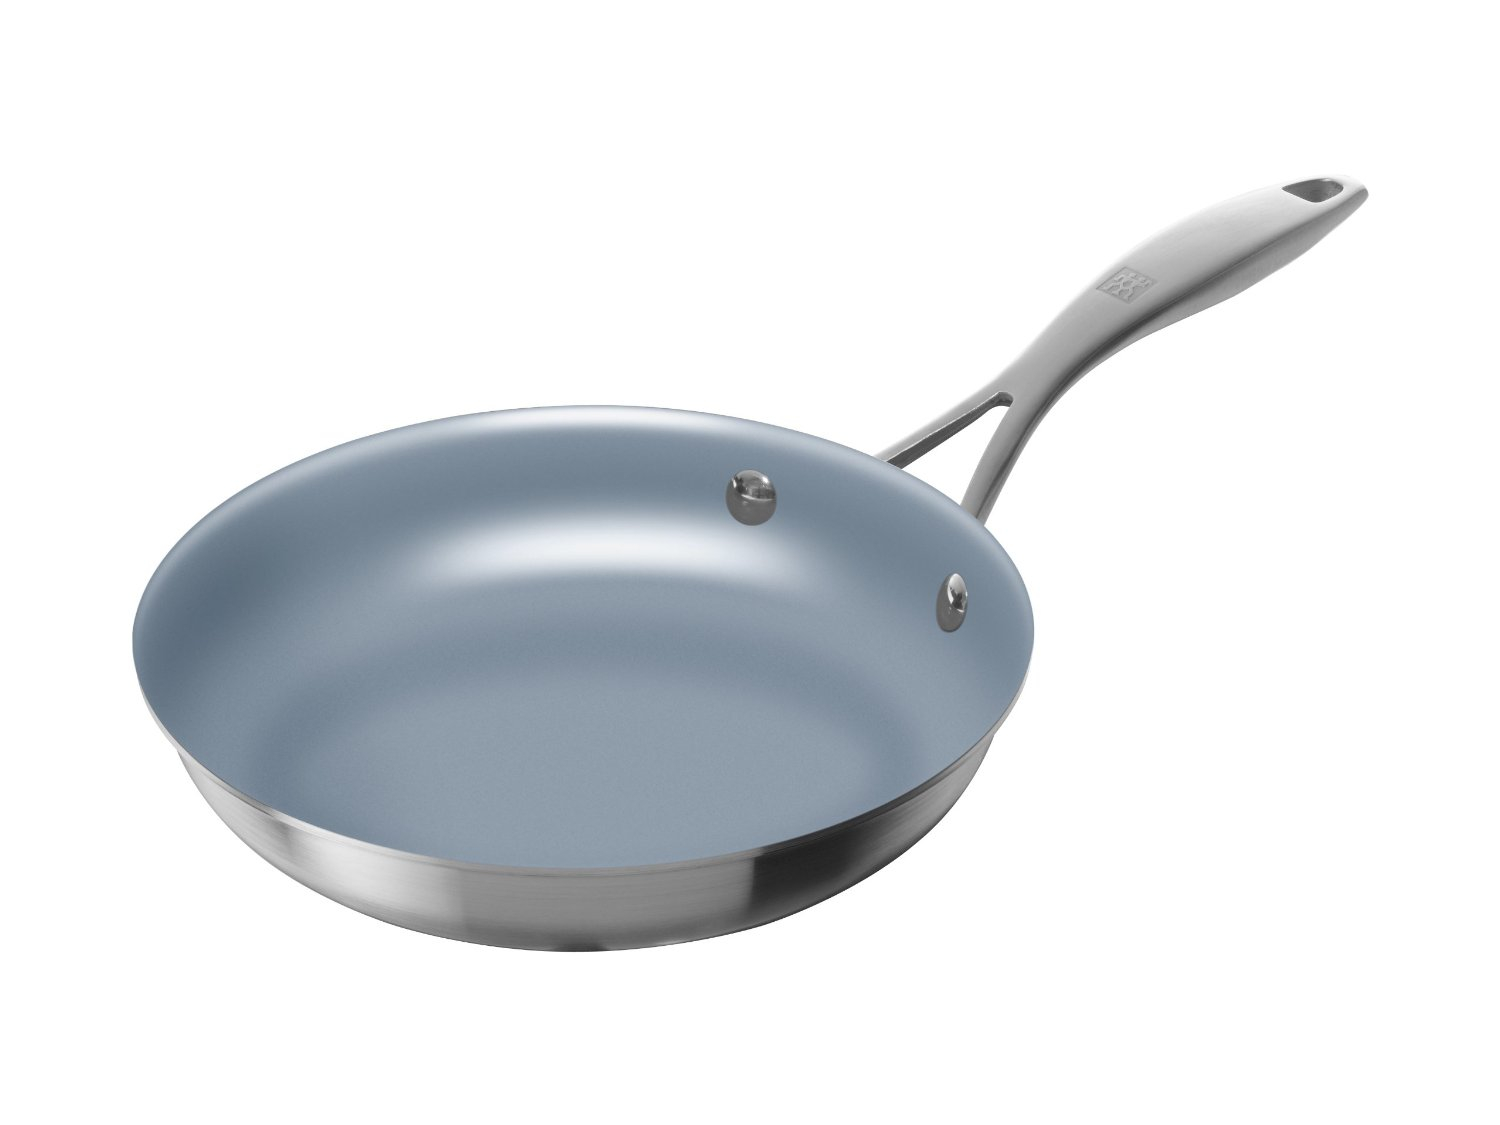 Zwilling pans